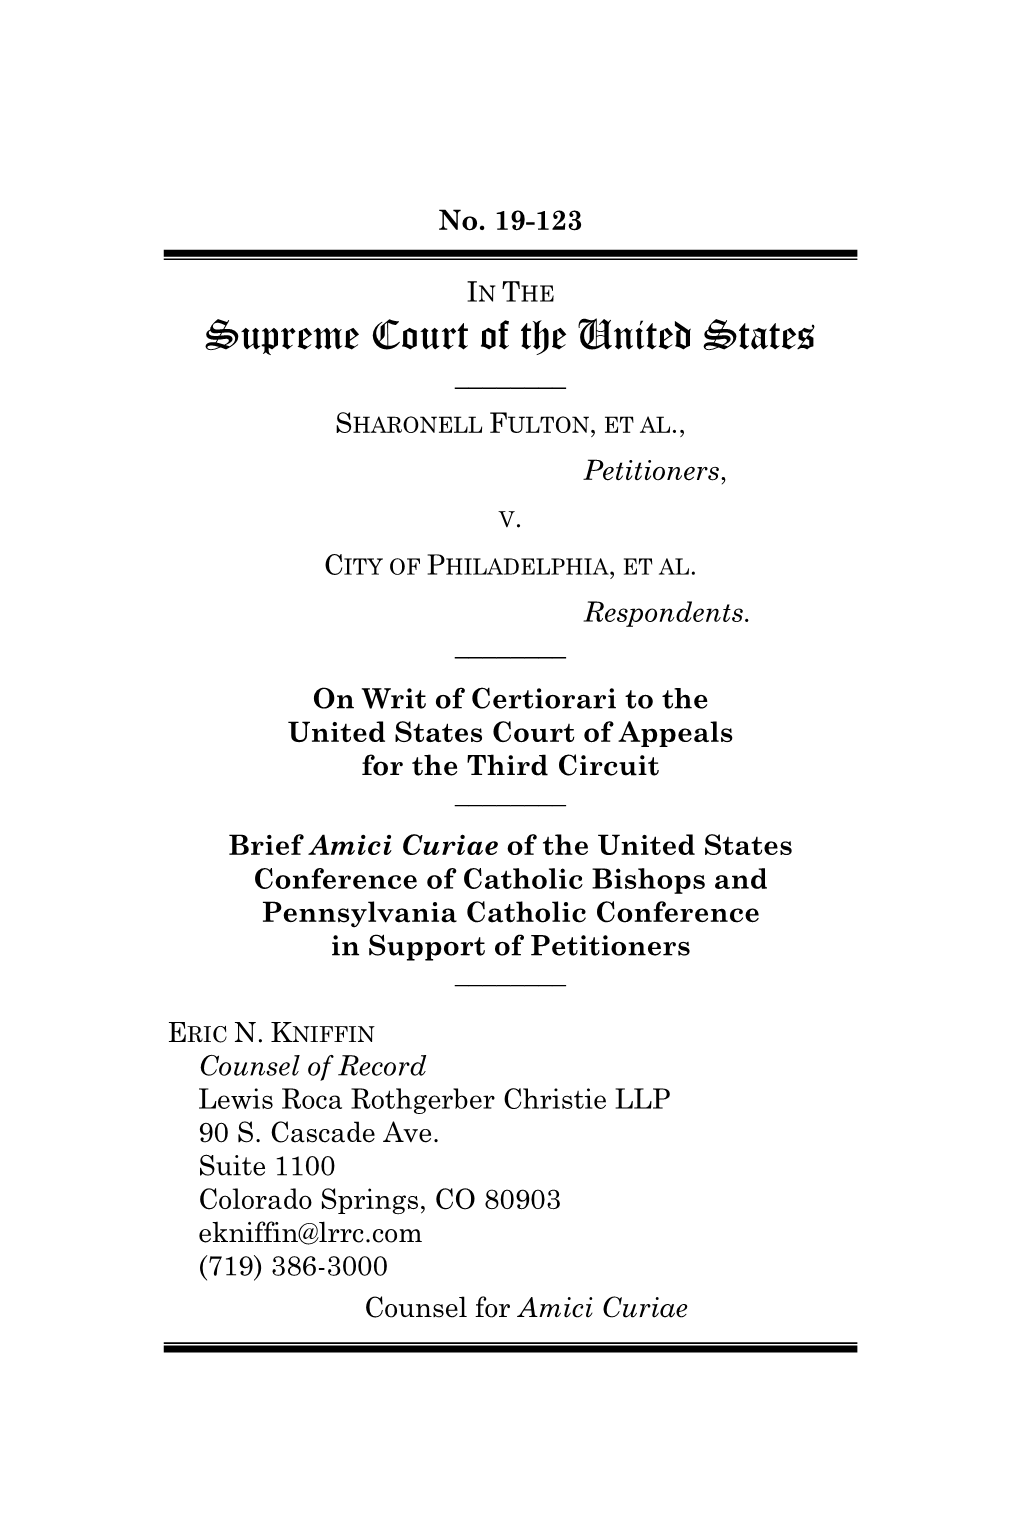 Brief Amici Curiae of United States Conference of Catholic Bishops, Et